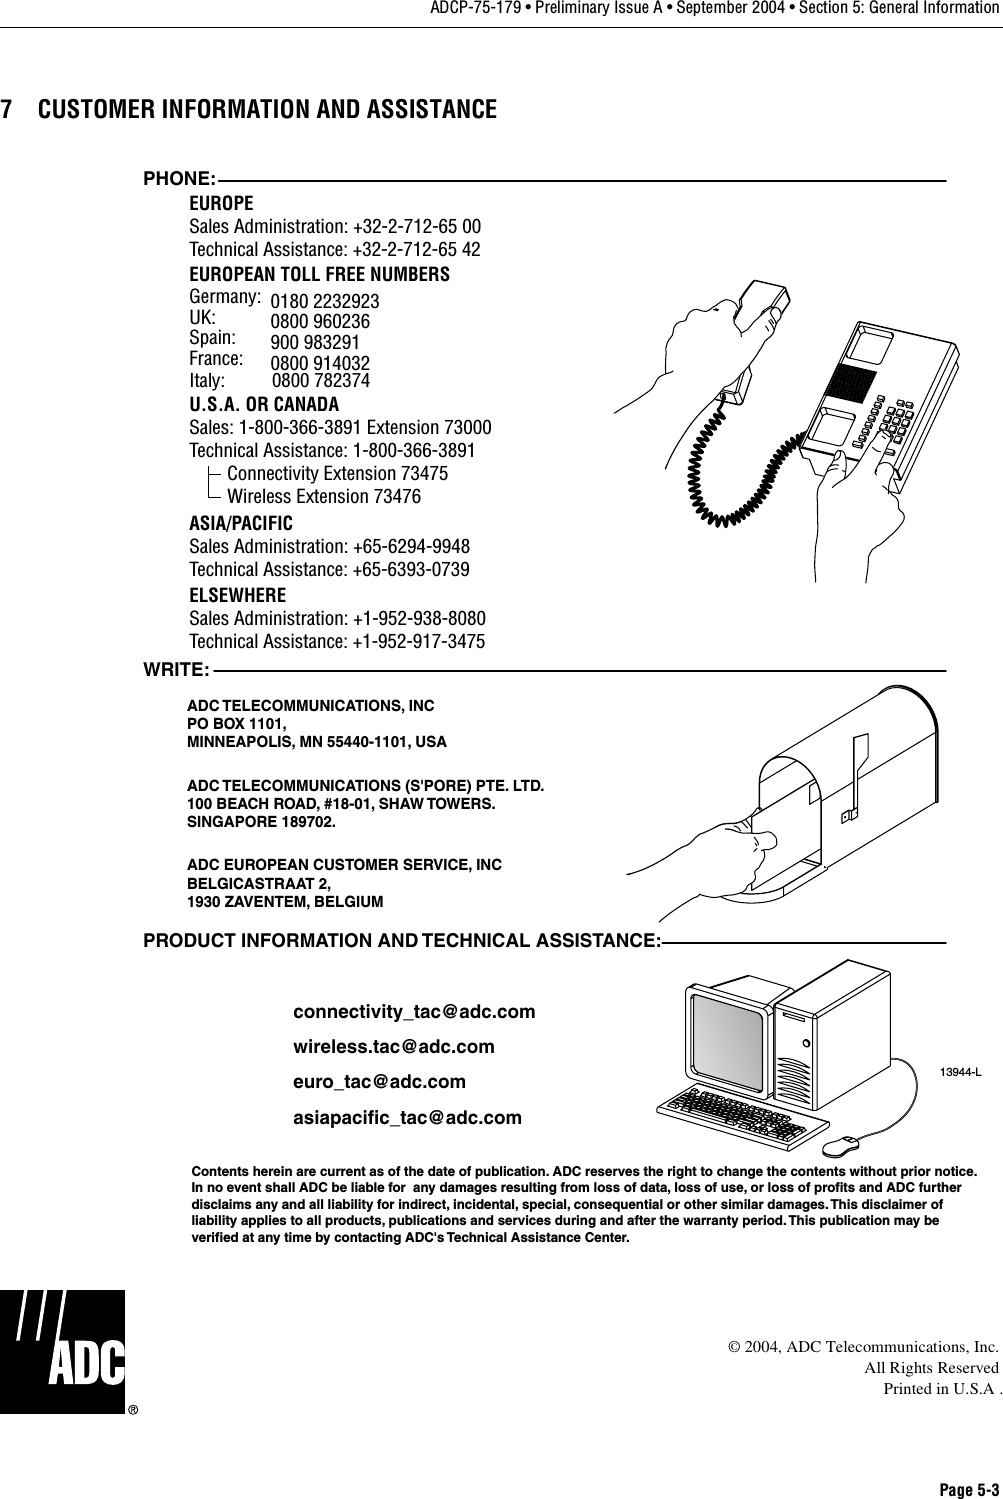 Page 5-3ADCP-75-179 • Preliminary Issue A • September 2004 • Section 5: General Information7 CUSTOMER INFORMATION AND ASSISTANCE© 2004, ADC Telecommunications, Inc.All Rights ReservedPrinted in U.S.A .13944-LWRITE:ADC TELECOMMUNICATIONS, INCPO BOX 1101,MINNEAPOLIS, MN 55440-1101, USAADC TELECOMMUNICATIONS (S&apos;PORE) PTE. LTD.100 BEACH ROAD, #18-01, SHAW TOWERS.SINGAPORE 189702.ADC EUROPEAN CUSTOMER SERVICE, INCBELGICASTRAAT 2,1930 ZAVENTEM, BELGIUMPHONE:EUROPESales Administration: +32-2-712-65 00Technical Assistance: +32-2-712-65 42EUROPEAN TOLL FREE NUMBERSUK: 0800 960236Spain: 900 983291France: 0800 914032Germany: 0180 2232923U.S.A. OR CANADASales: 1-800-366-3891 Extension 73000Technical Assistance: 1-800-366-3891        Connectivity Extension 73475        Wireless Extension 73476ASIA/PACIFICSales Administration: +65-6294-9948Technical Assistance: +65-6393-0739ELSEWHERESales Administration: +1-952-938-8080Technical Assistance: +1-952-917-3475Italy:          0800 782374PRODUCT INFORMATION AND TECHNICAL ASSISTANCE:Contents herein are current as of the date of publication. ADC reserves the right to change the contents without prior notice.In no event shall ADC be liable for  any damages resulting from loss of data, loss of use, or loss of profits and ADC furtherdisclaims any and all liability for indirect, incidental, special, consequential or other similar damages. This disclaimer ofliability applies to all products, publications and services during and after the warranty period. This publication may beverified at any time by contacting ADC&apos;s Technical Assistance Center. euro_tac@adc.comasiapacific_tac@adc.comwireless.tac@adc.comconnectivity_tac@adc.com